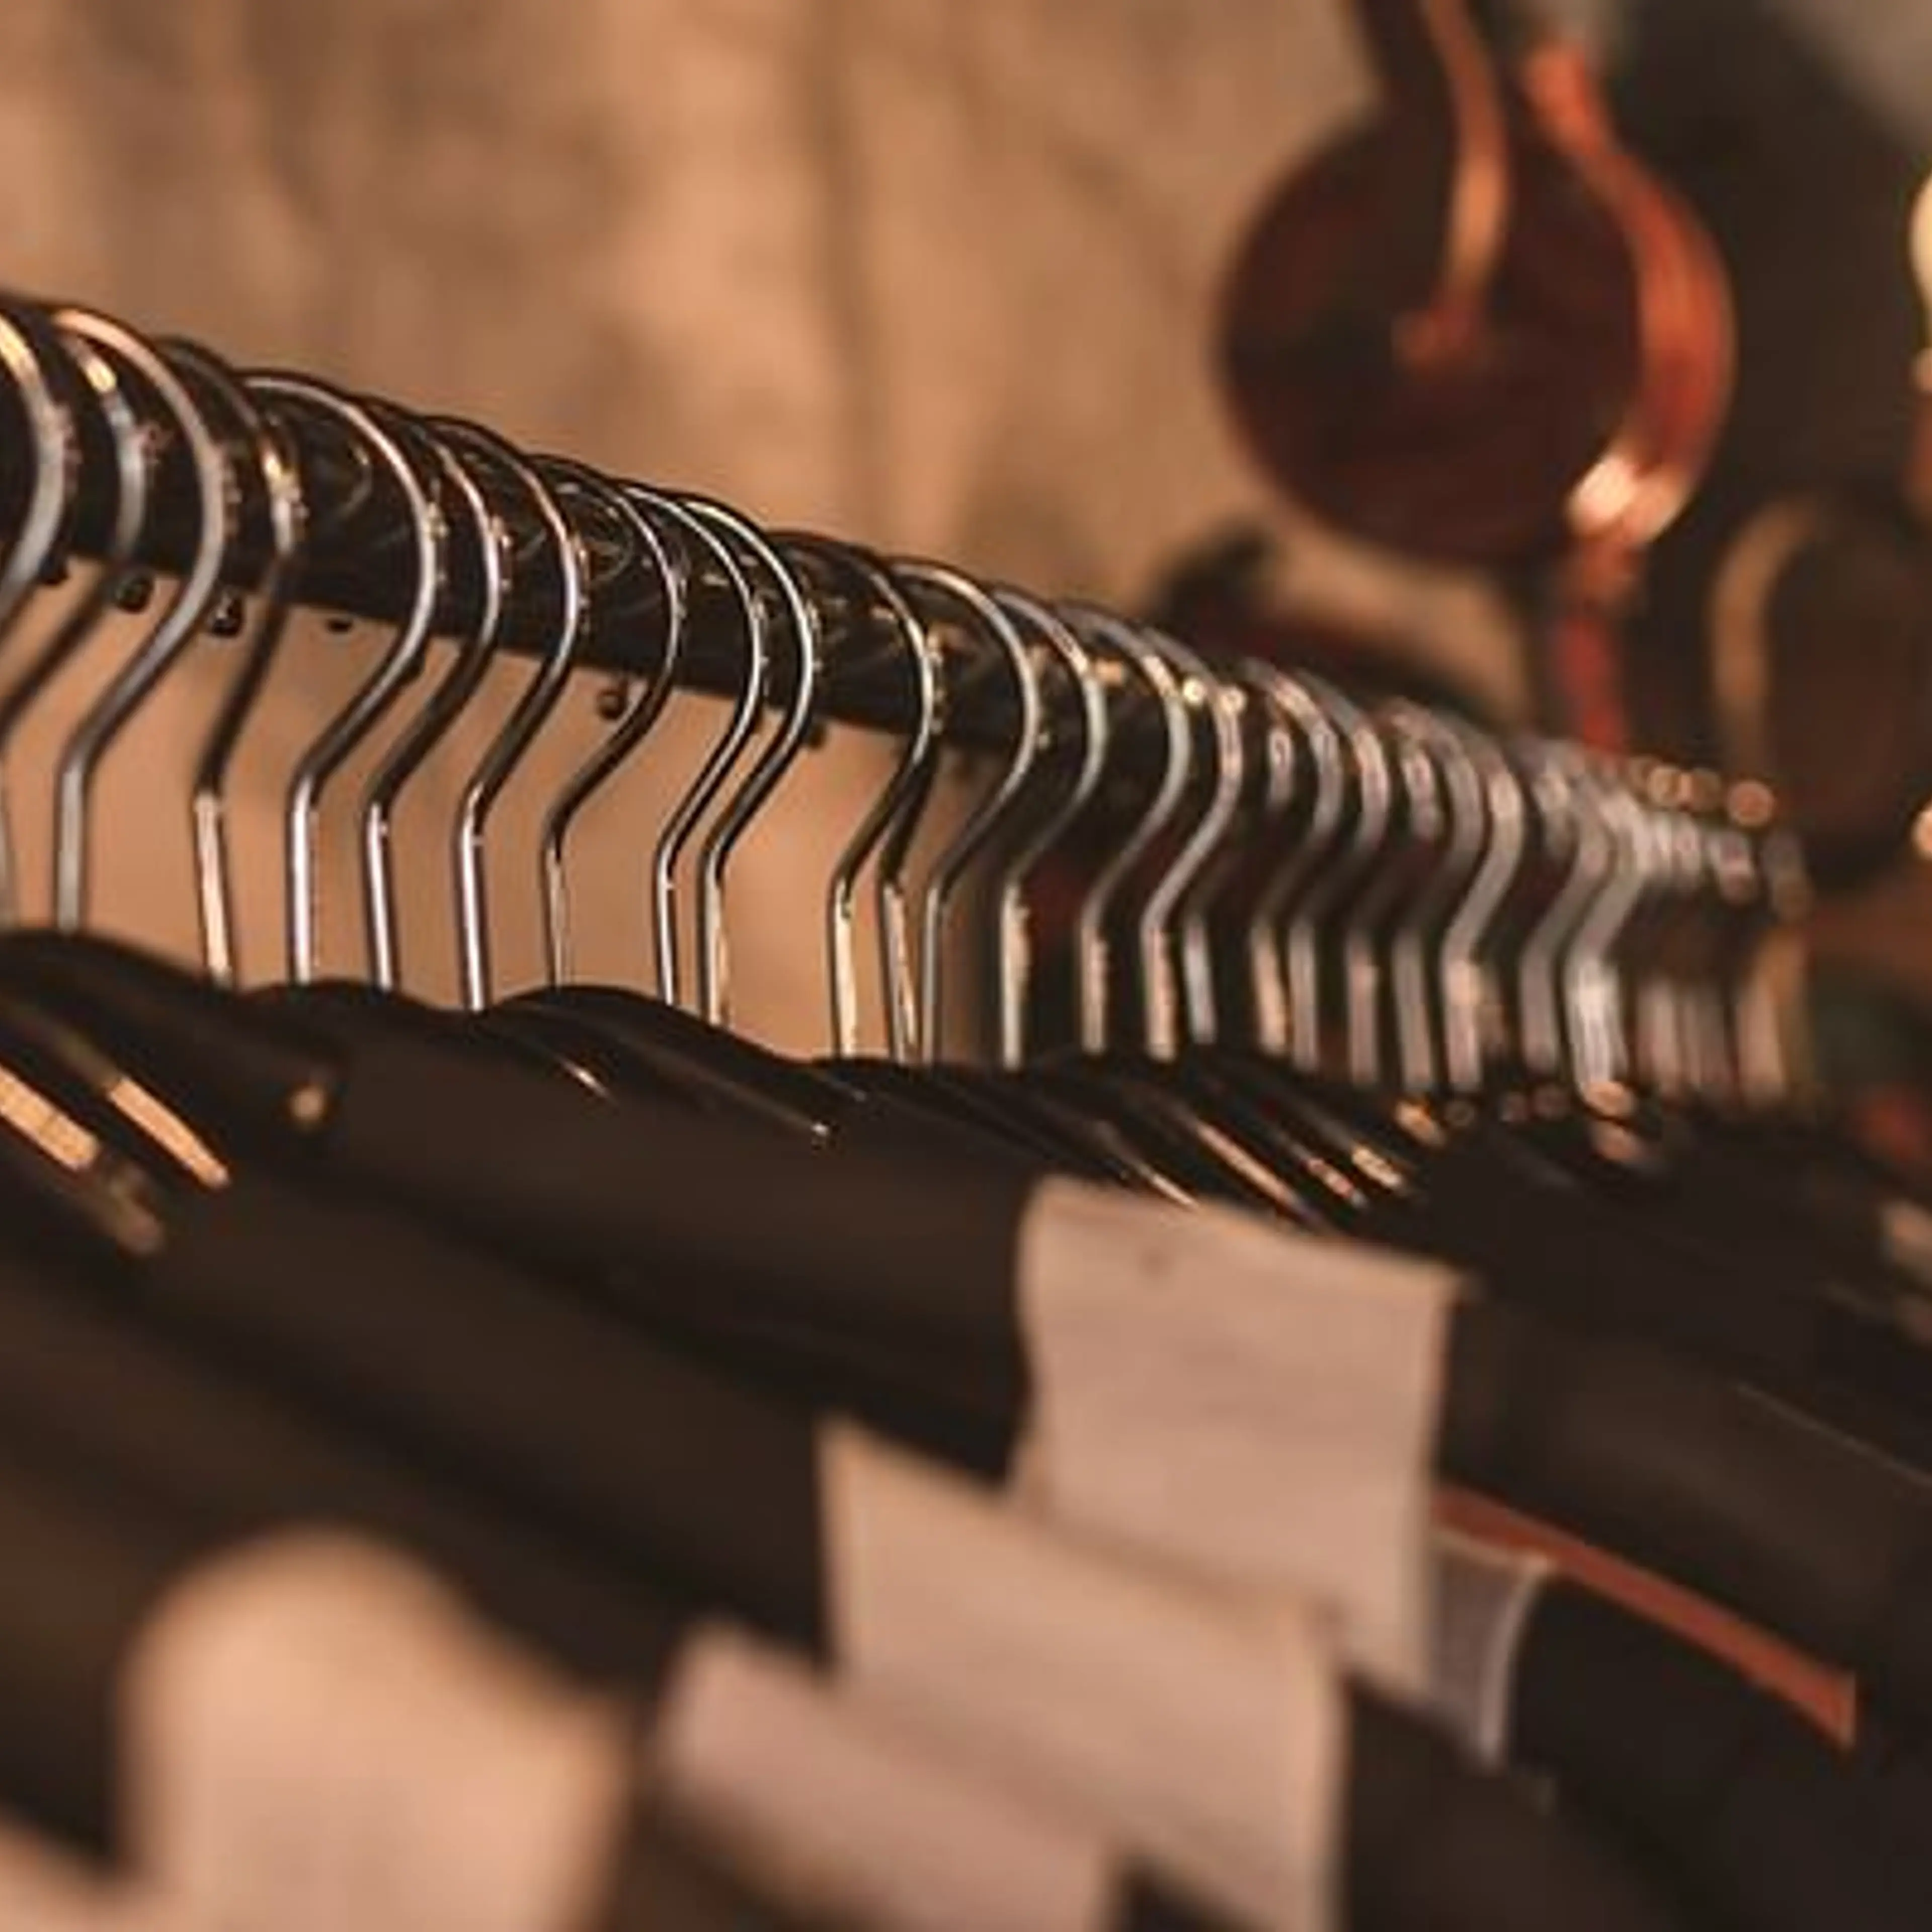 Fast fashion to comprise over 25% of total retail by FY31: Redseer